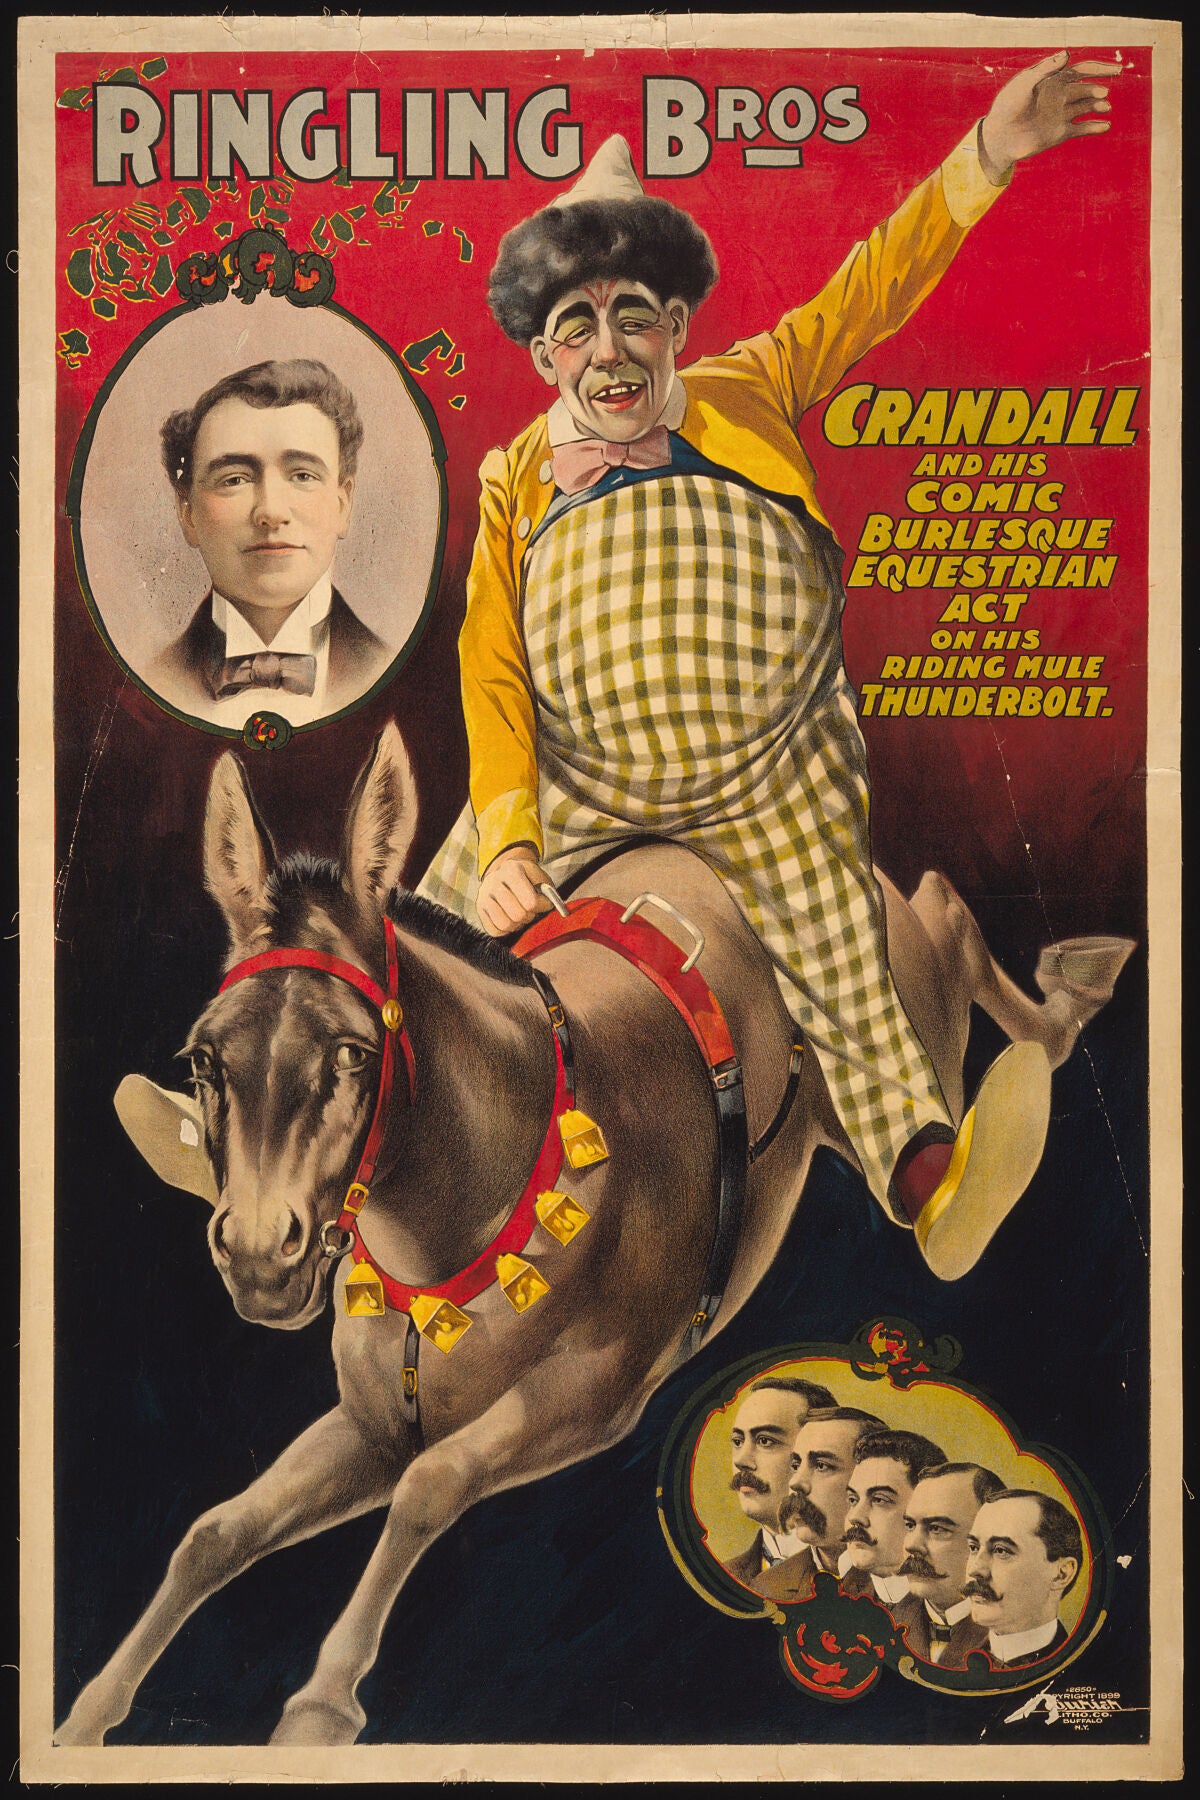 Ringling Bros.--Crandall and his comic burlesque equestrian act on his riding mule Thunderbolt c